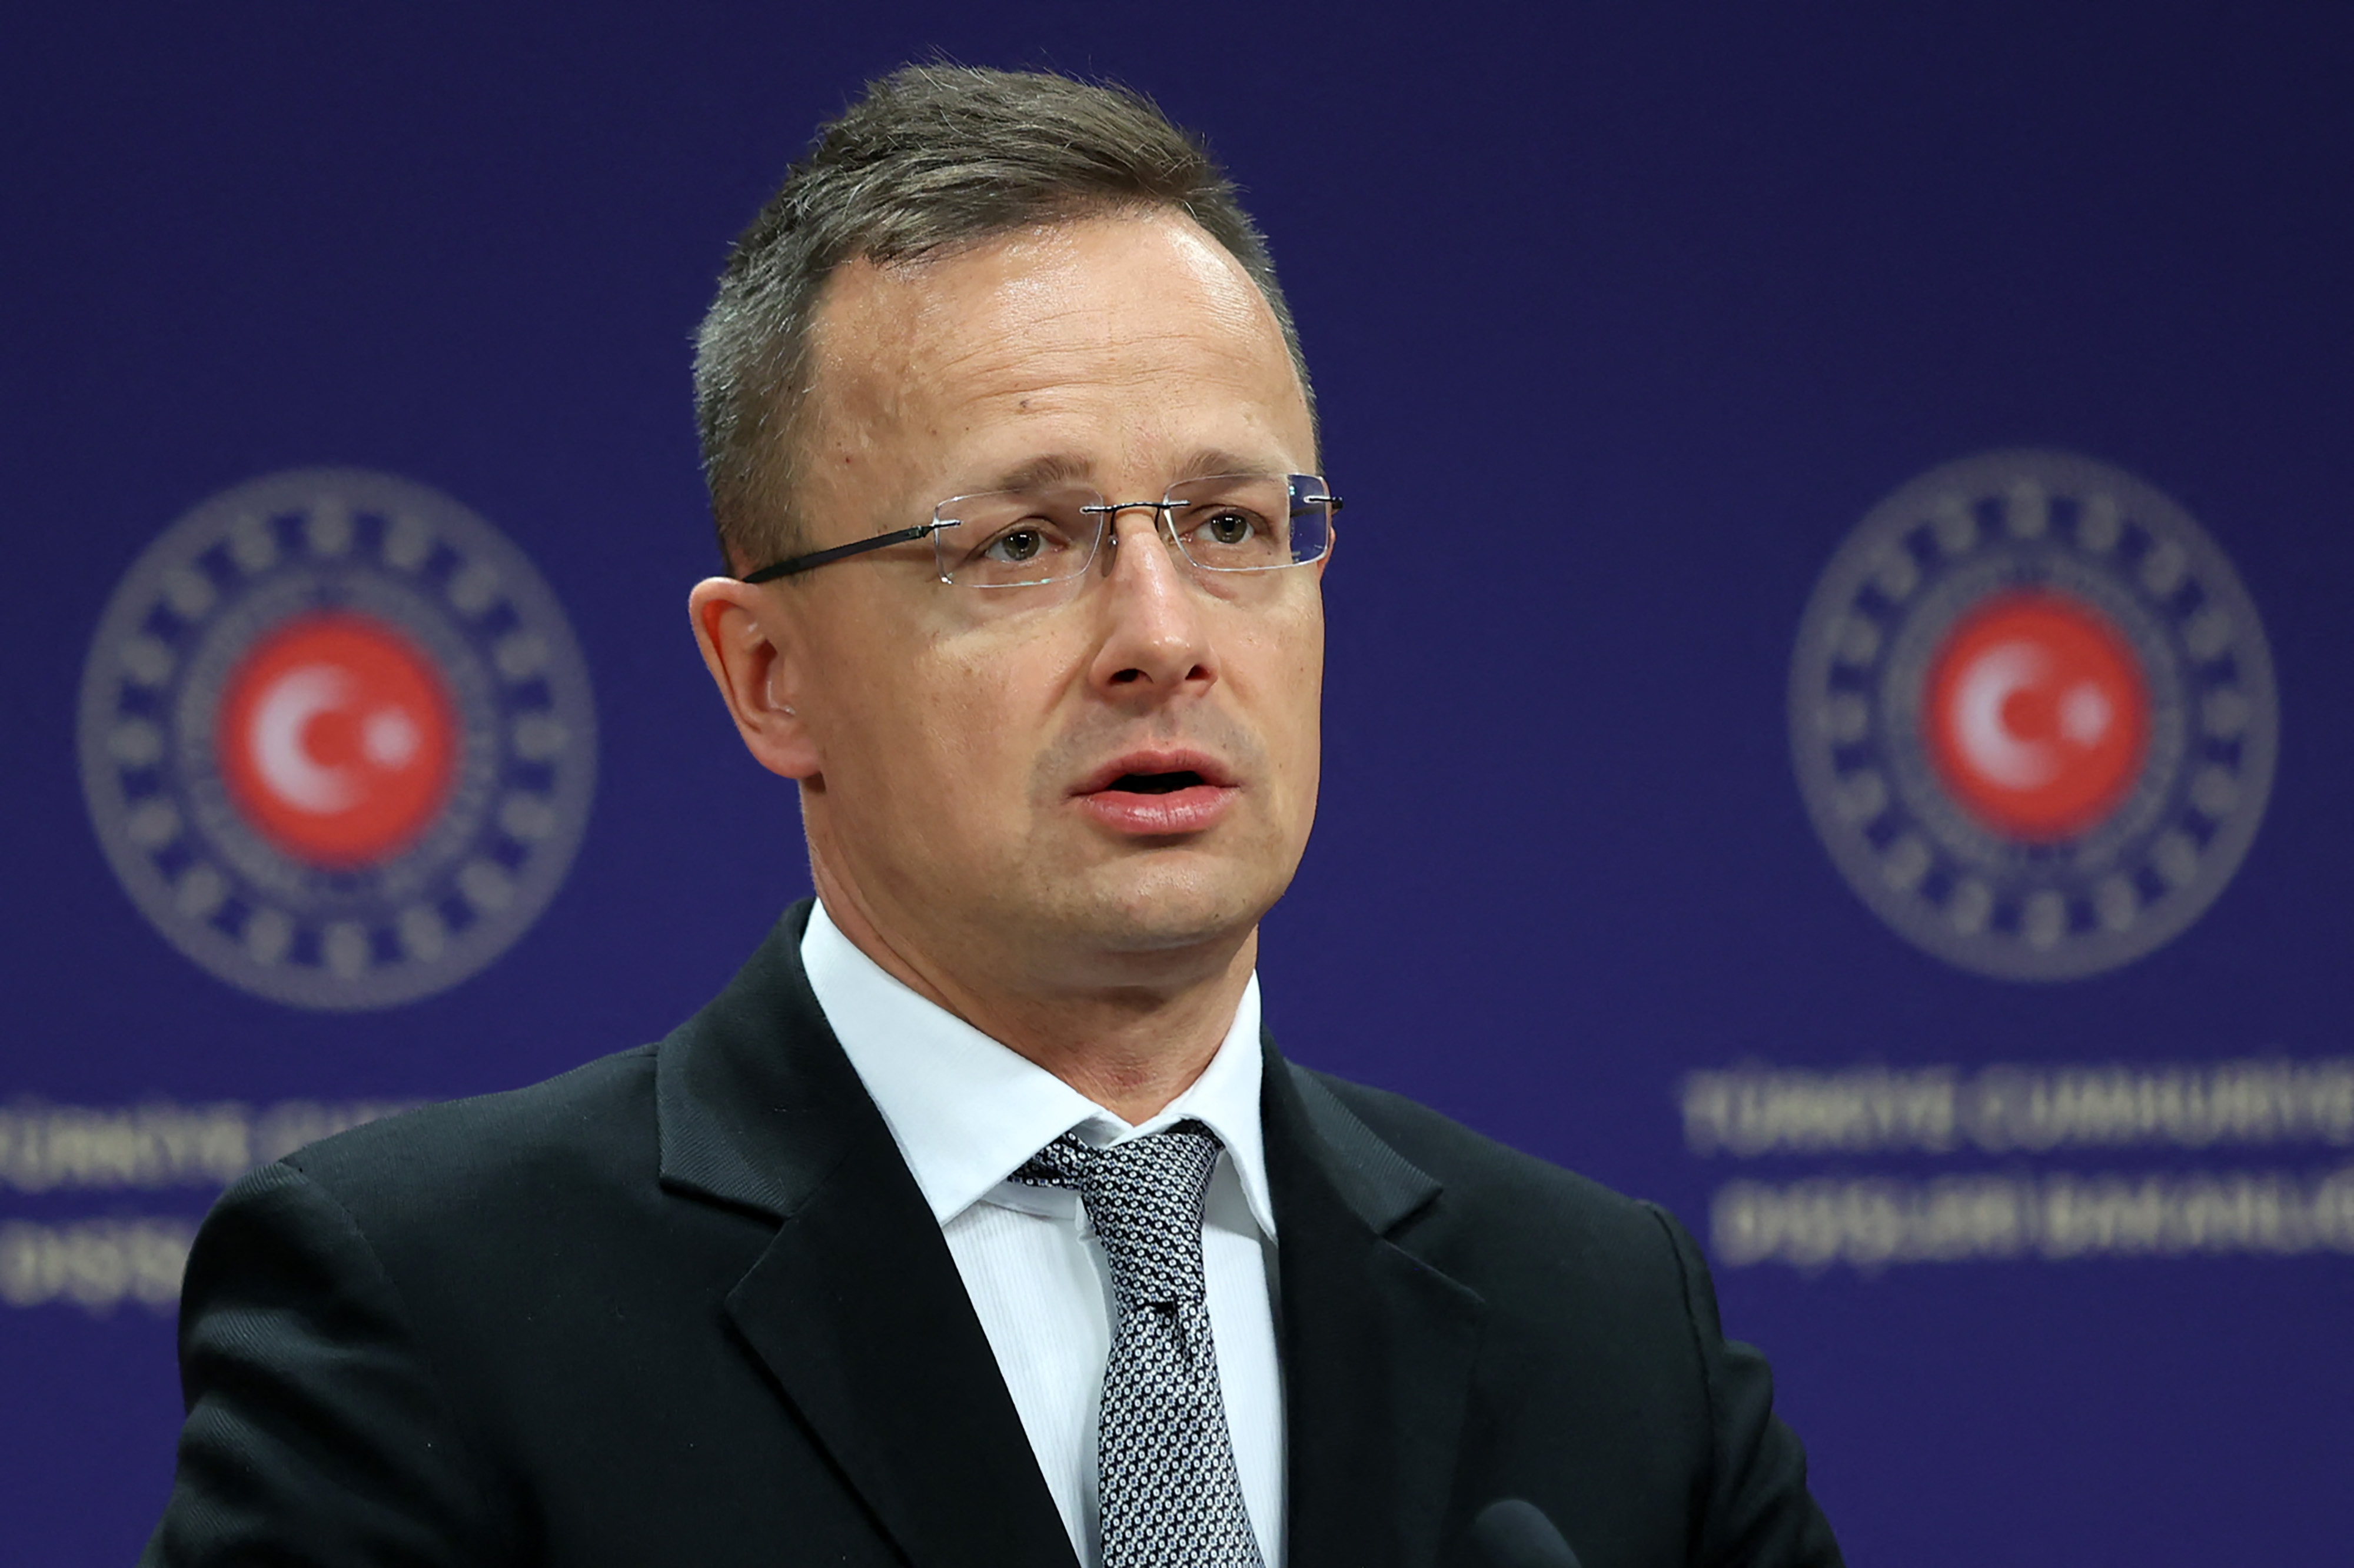 Hungarian Foreign Minister Péter Szijjártó gives a press conference after meeting with his Turkish counterpart in Ankara, Turkey, on April 19.